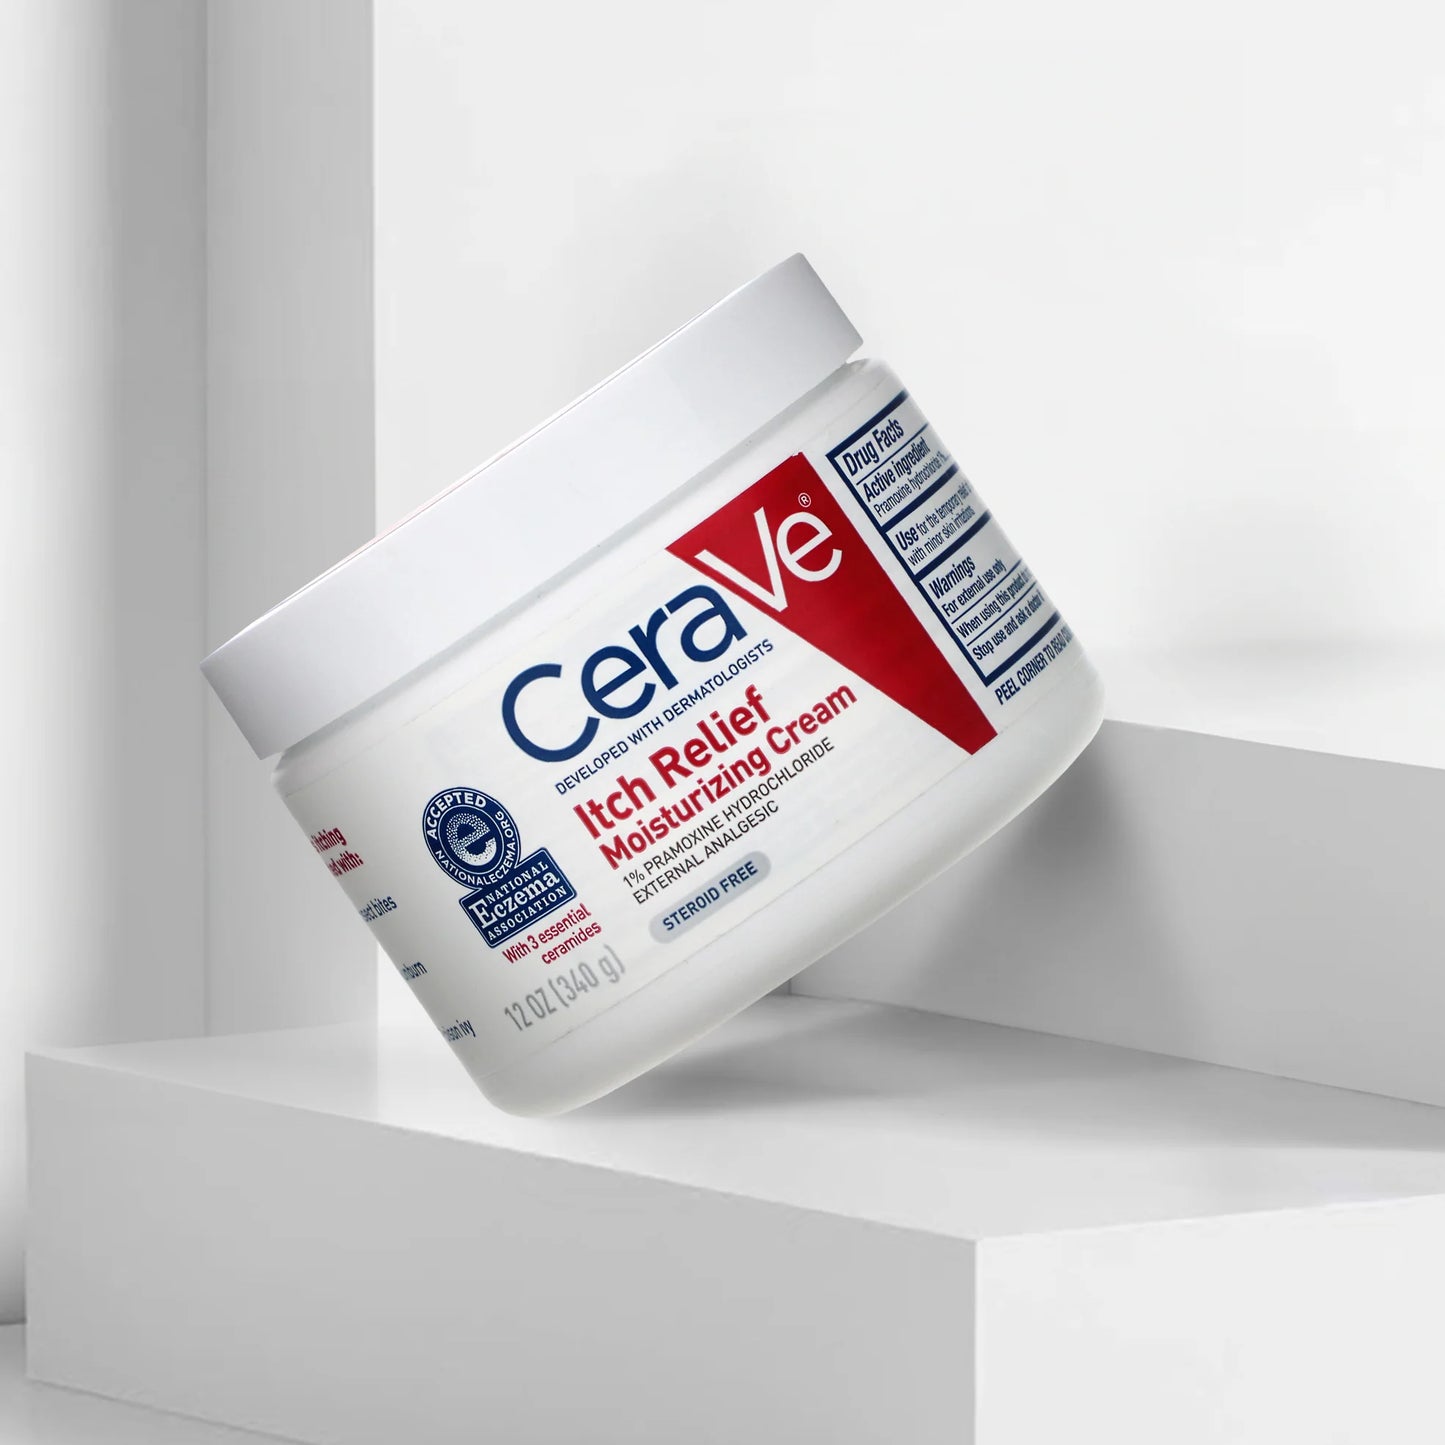 CeraVe, Itch Relief Moisturizing Cream 340g All About Skin Doha Skincare Qatar Beauty Cosmetics Available in Qatar Available in Qatar Store all about skin doha qatar skincare cosmetics beauty